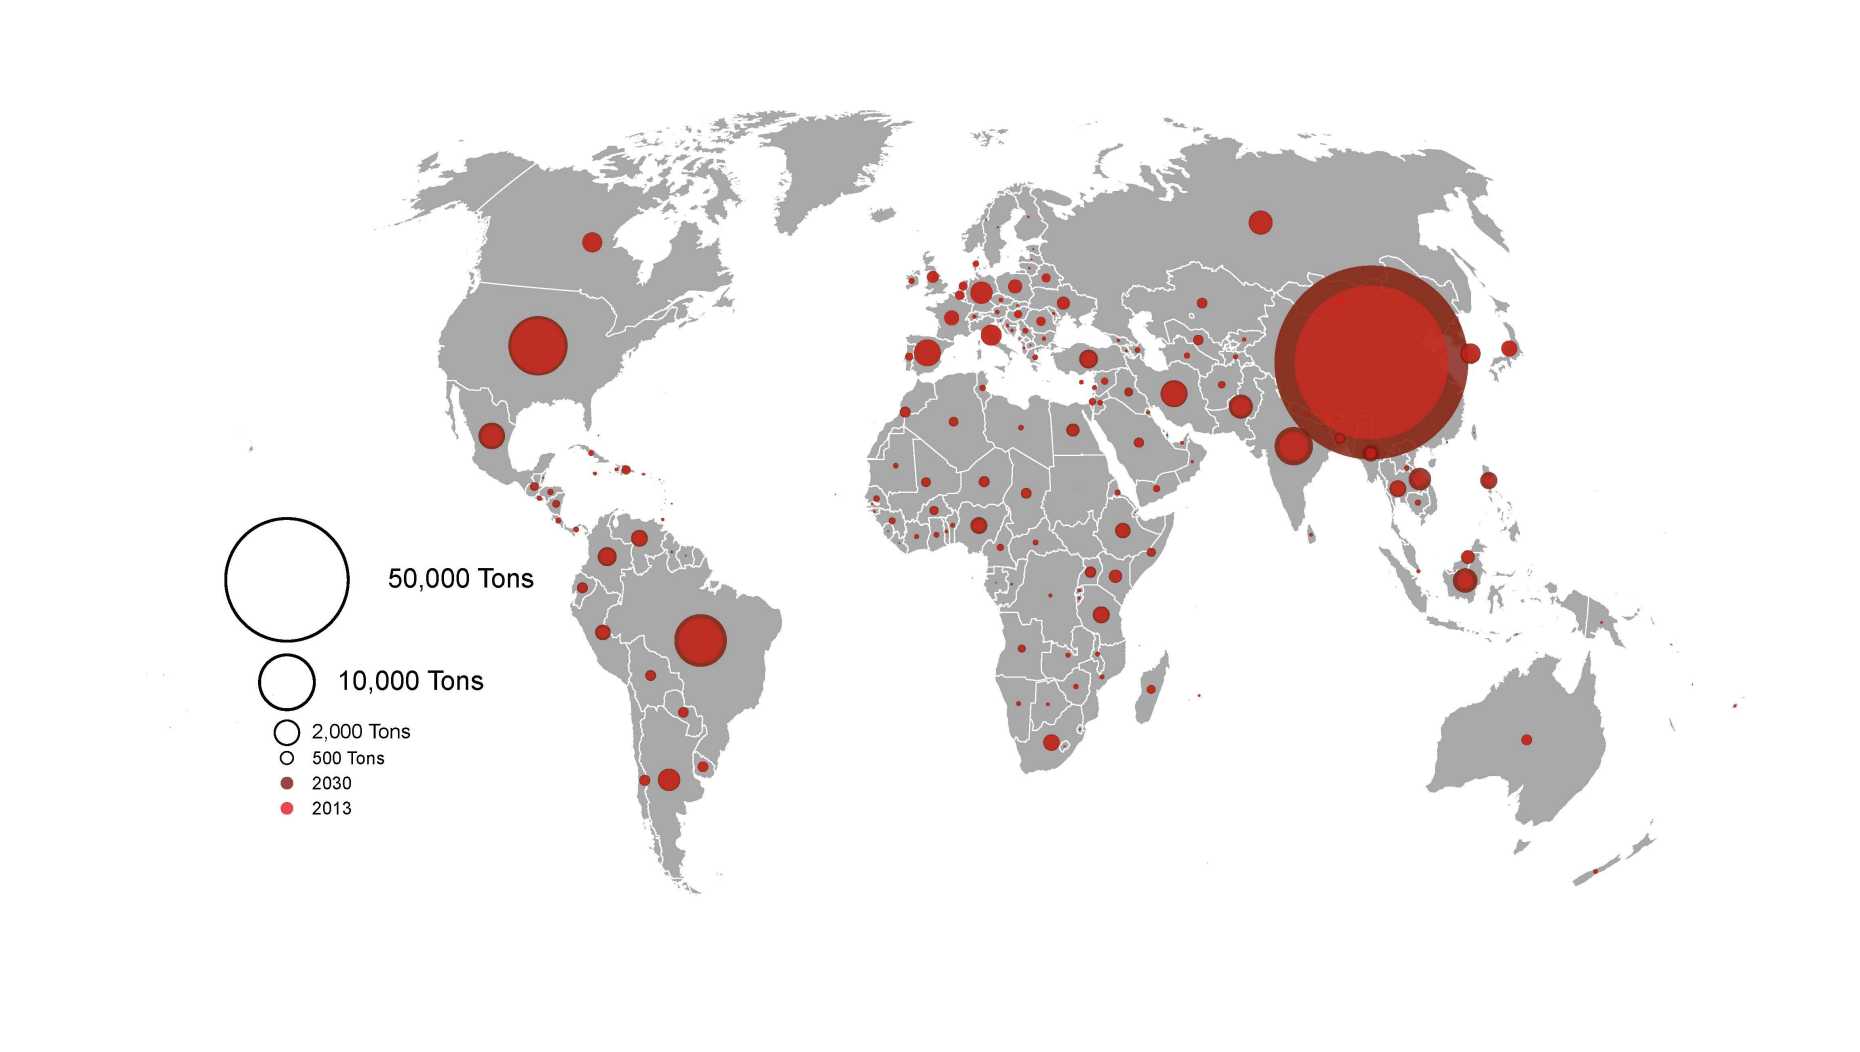 Enlarged view: Antibiotic consumption for livestock production by country in 2013 (light red) and projected for 2030 (dark red). (from Van Boeckel et al., Science 357, 1350 (2017))